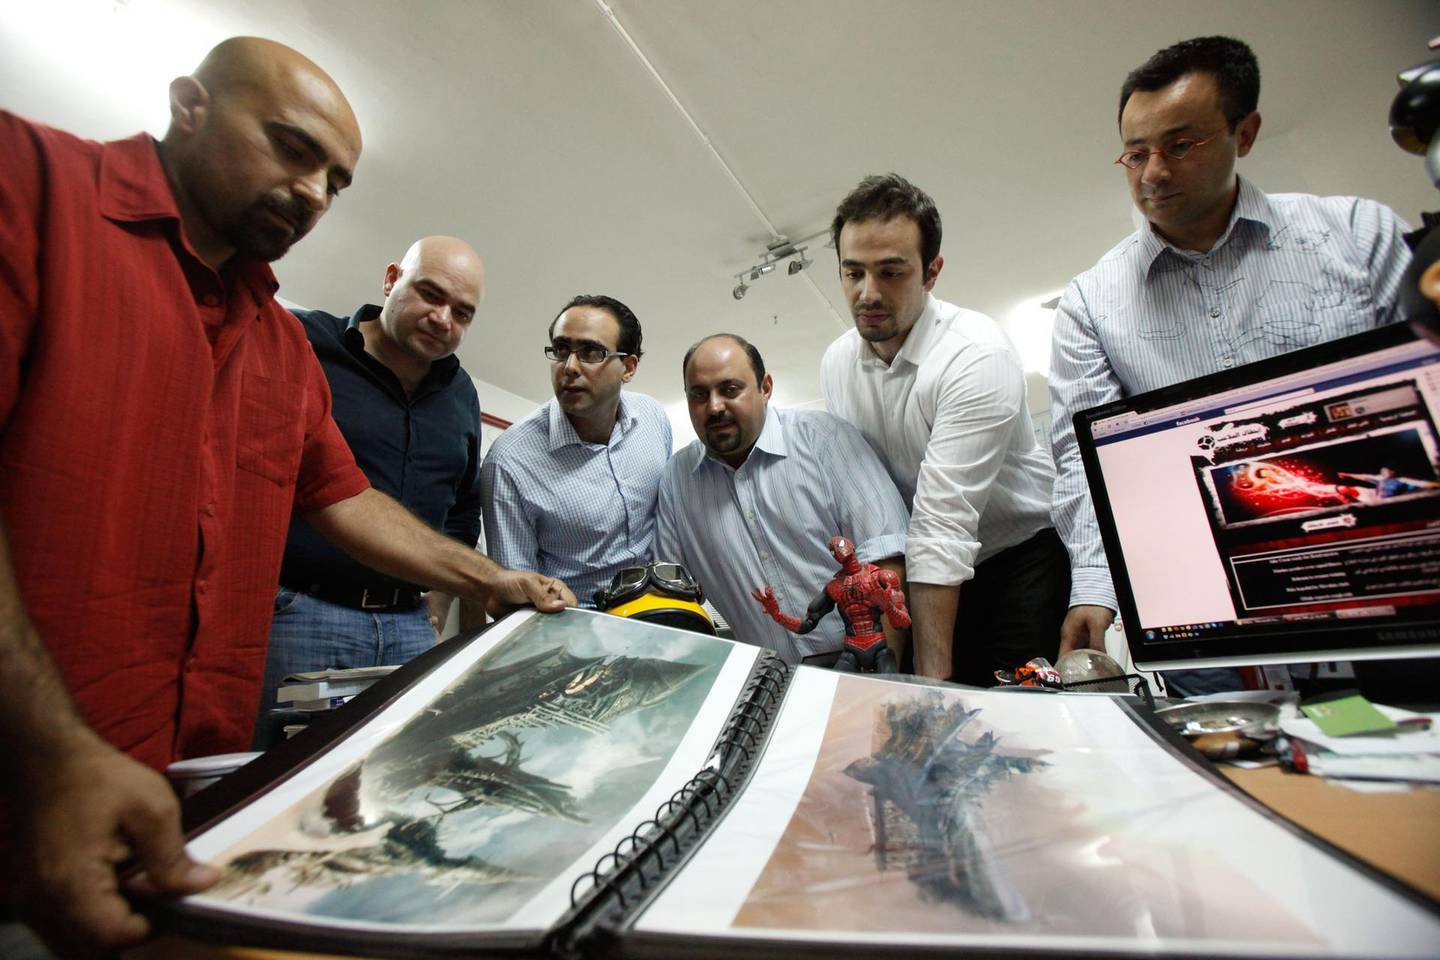 Suleiman Bakhit (L) discusses on his games paints with (from L to R): Afif Toukan, Mohammad Haj Hasan, Muhannad Ebwini, Suhaib Thiab and Nour Khrais, at his office in Amman, Jordan on June 08, 2010. (Salah Malkawi for The National)